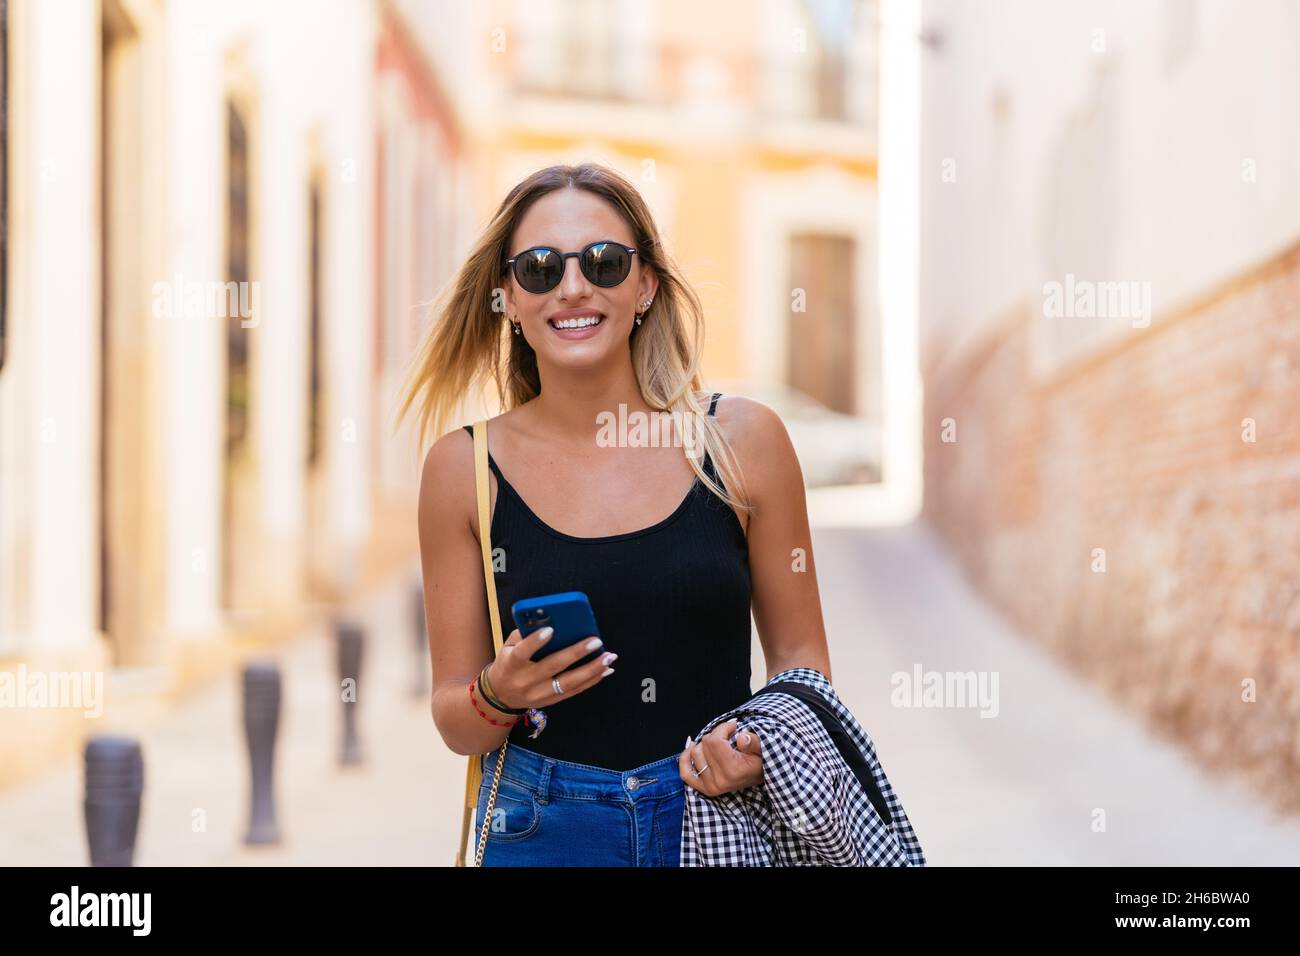 Positive woman with smartphone looking at camera Stock Photo